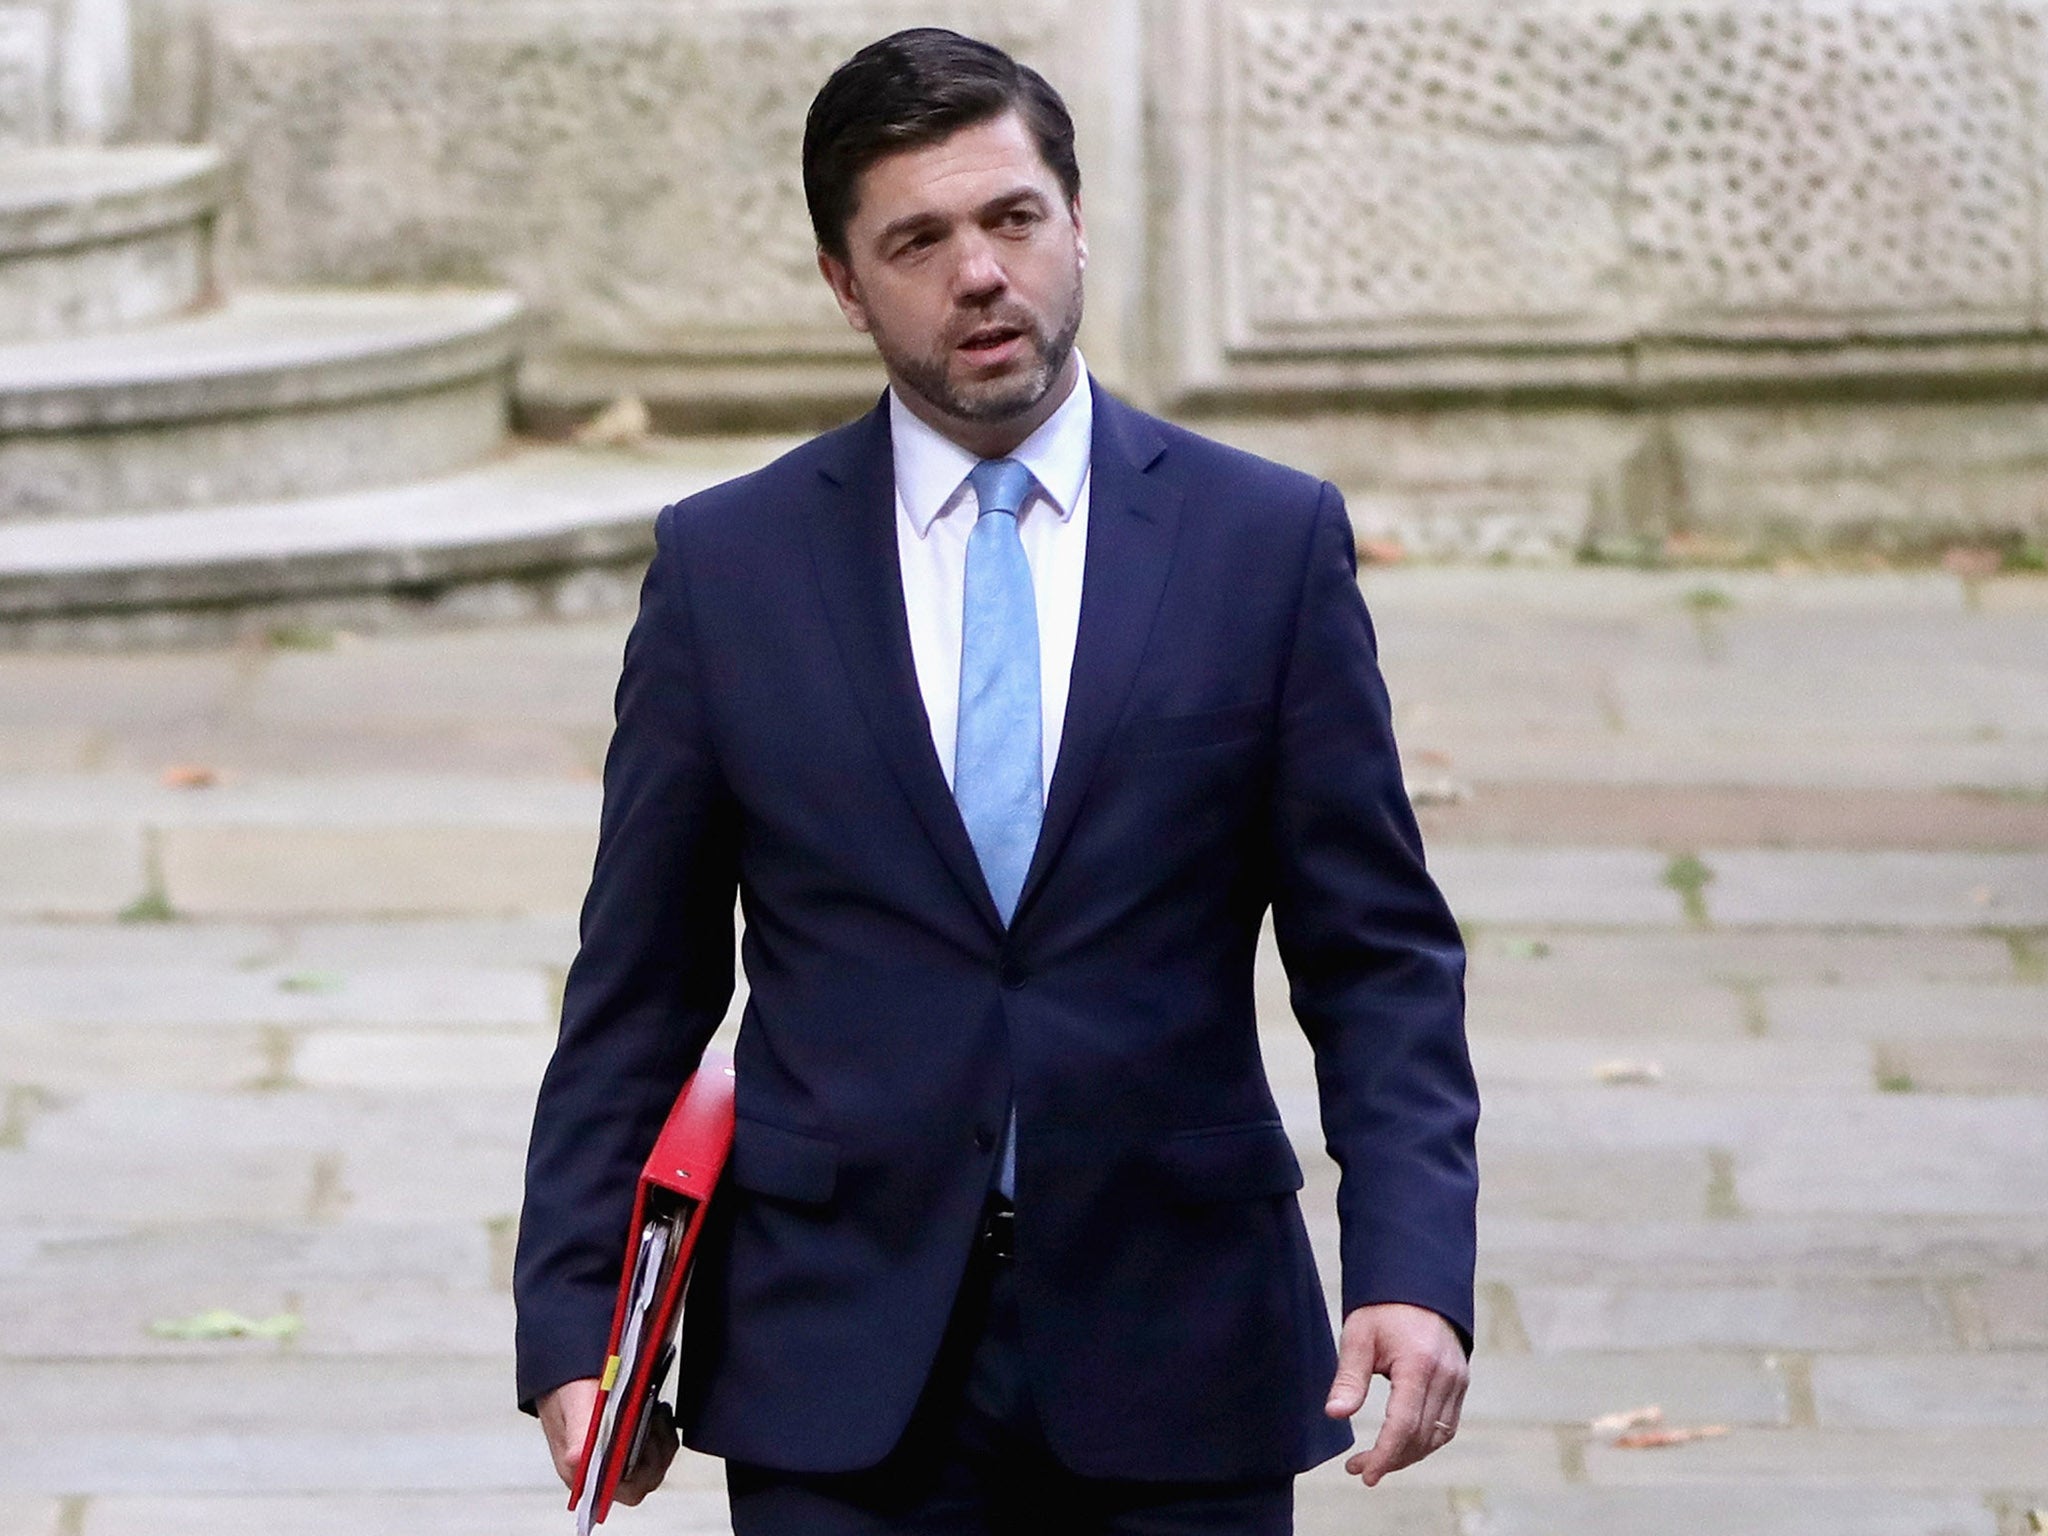 Stephen Crabb has been cleared of breaching party rules over sexual harassment claims